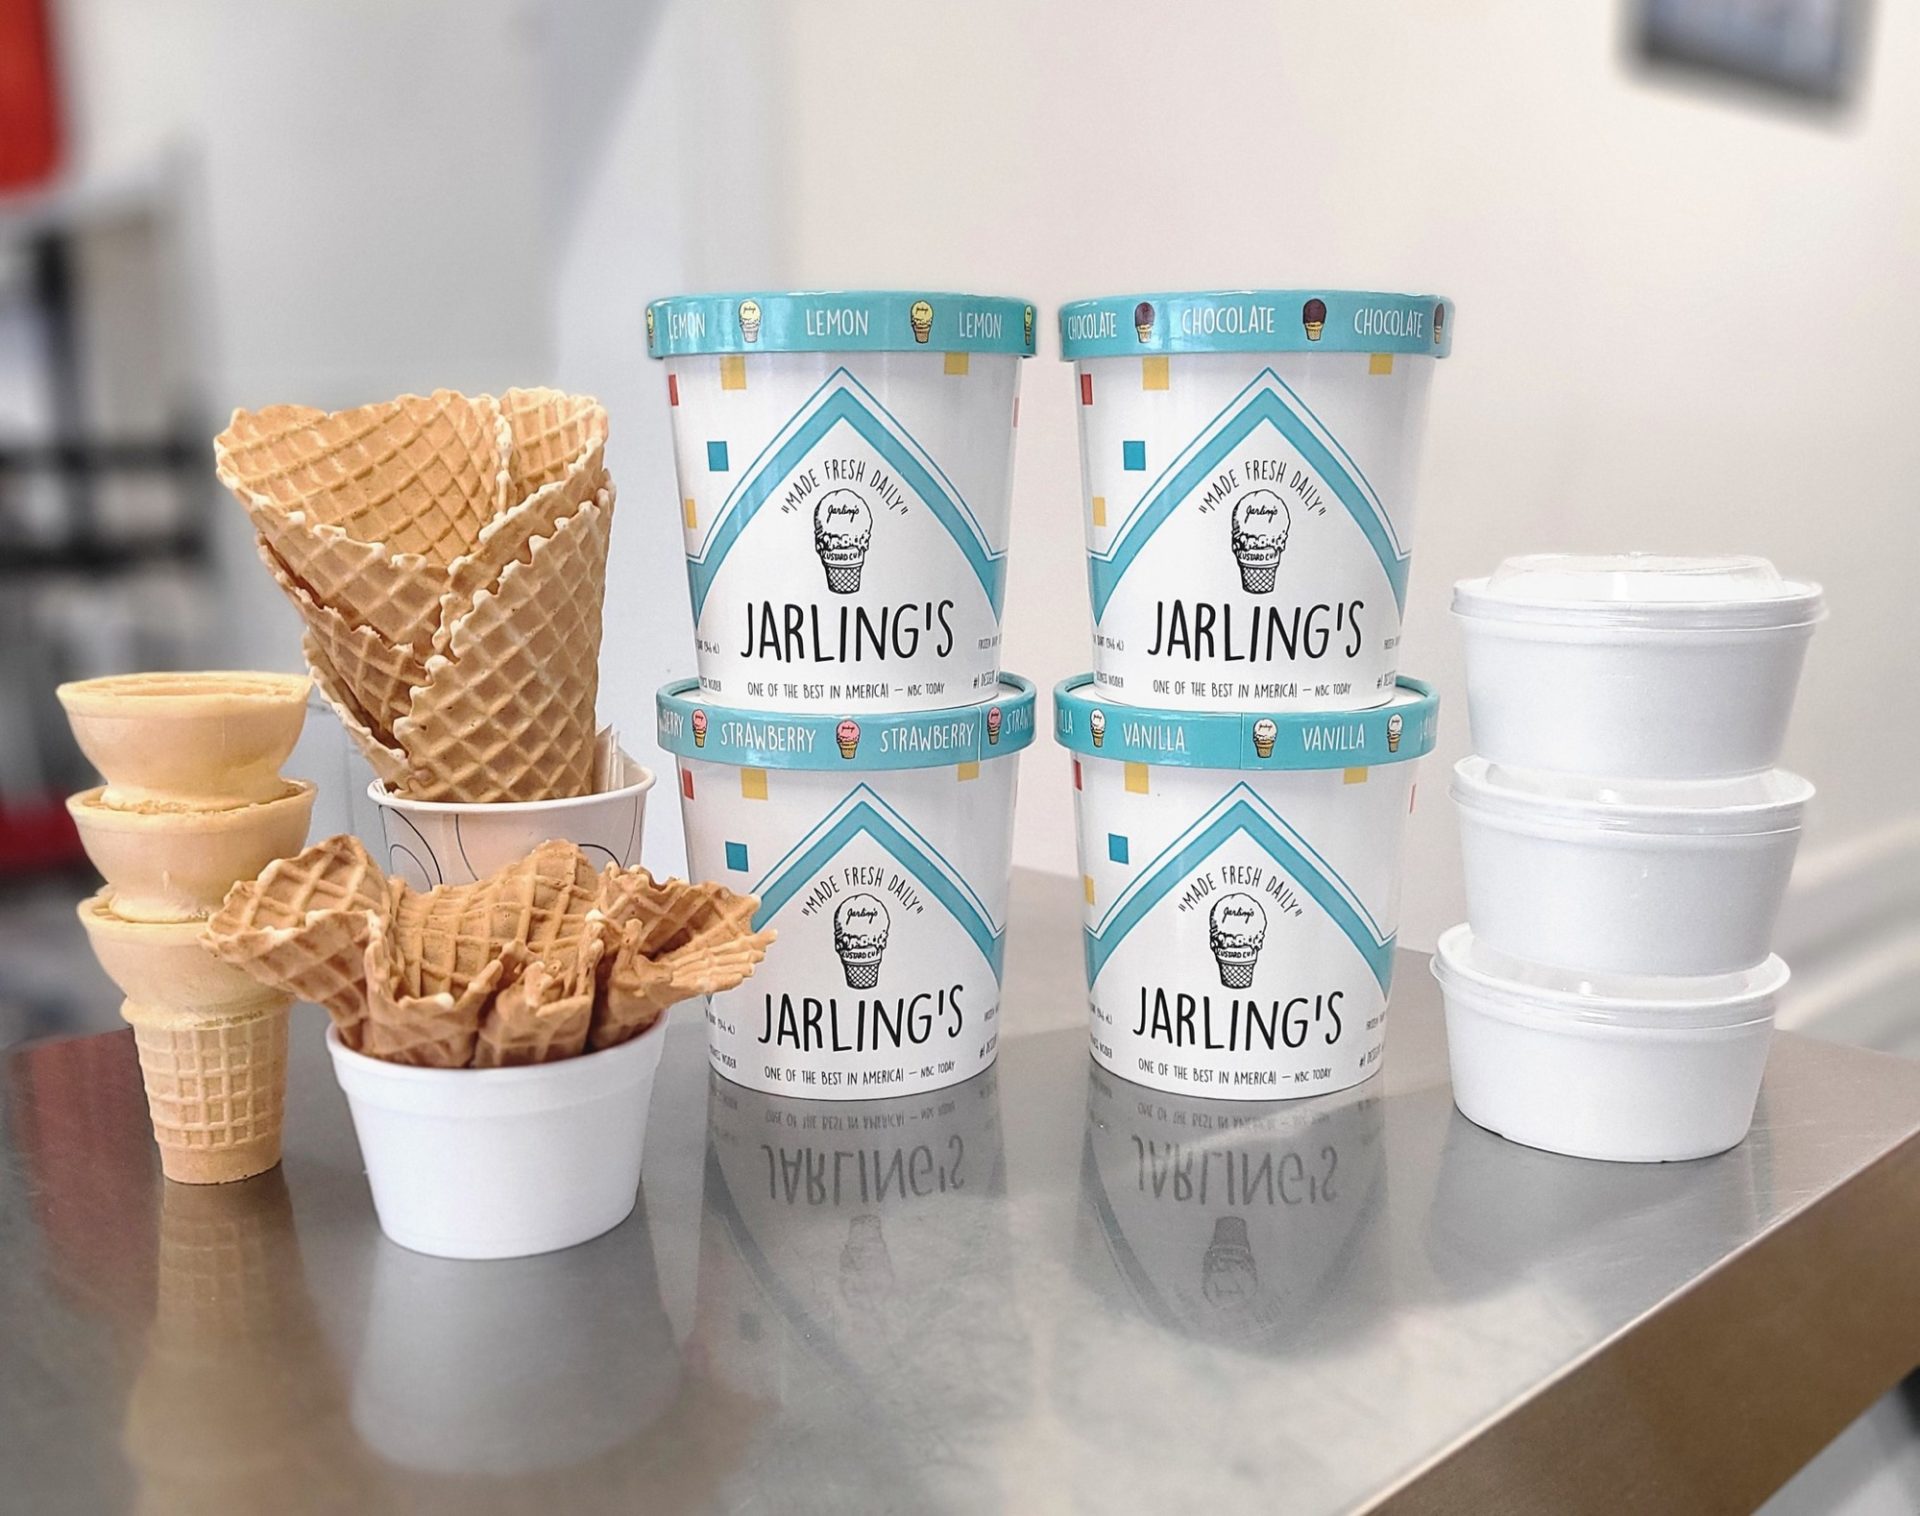 Four quarts of ice cream next to two waffle cones and white styrofoam cups